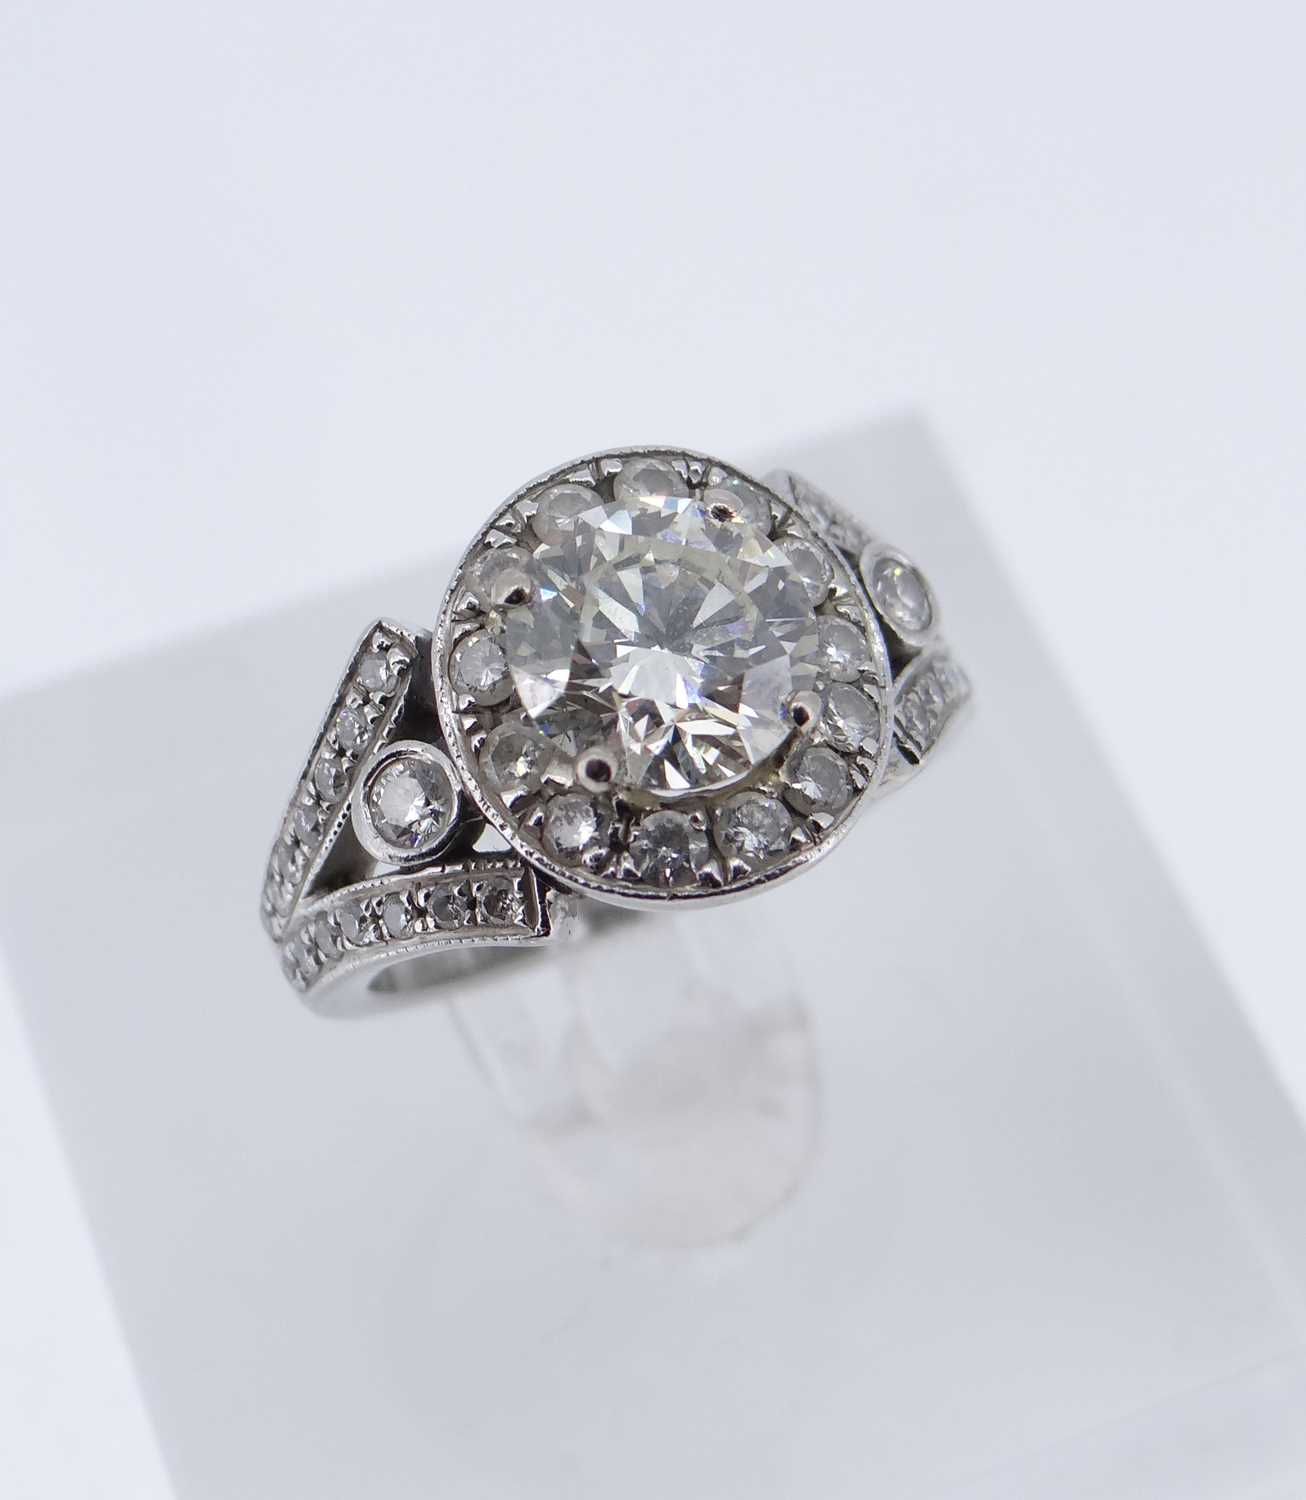 MODERN PLATINUM DIAMOND ENCRUSTED ENGAGEMENT RING & MATCHING WEDDING BAND, the central stone - Image 2 of 8